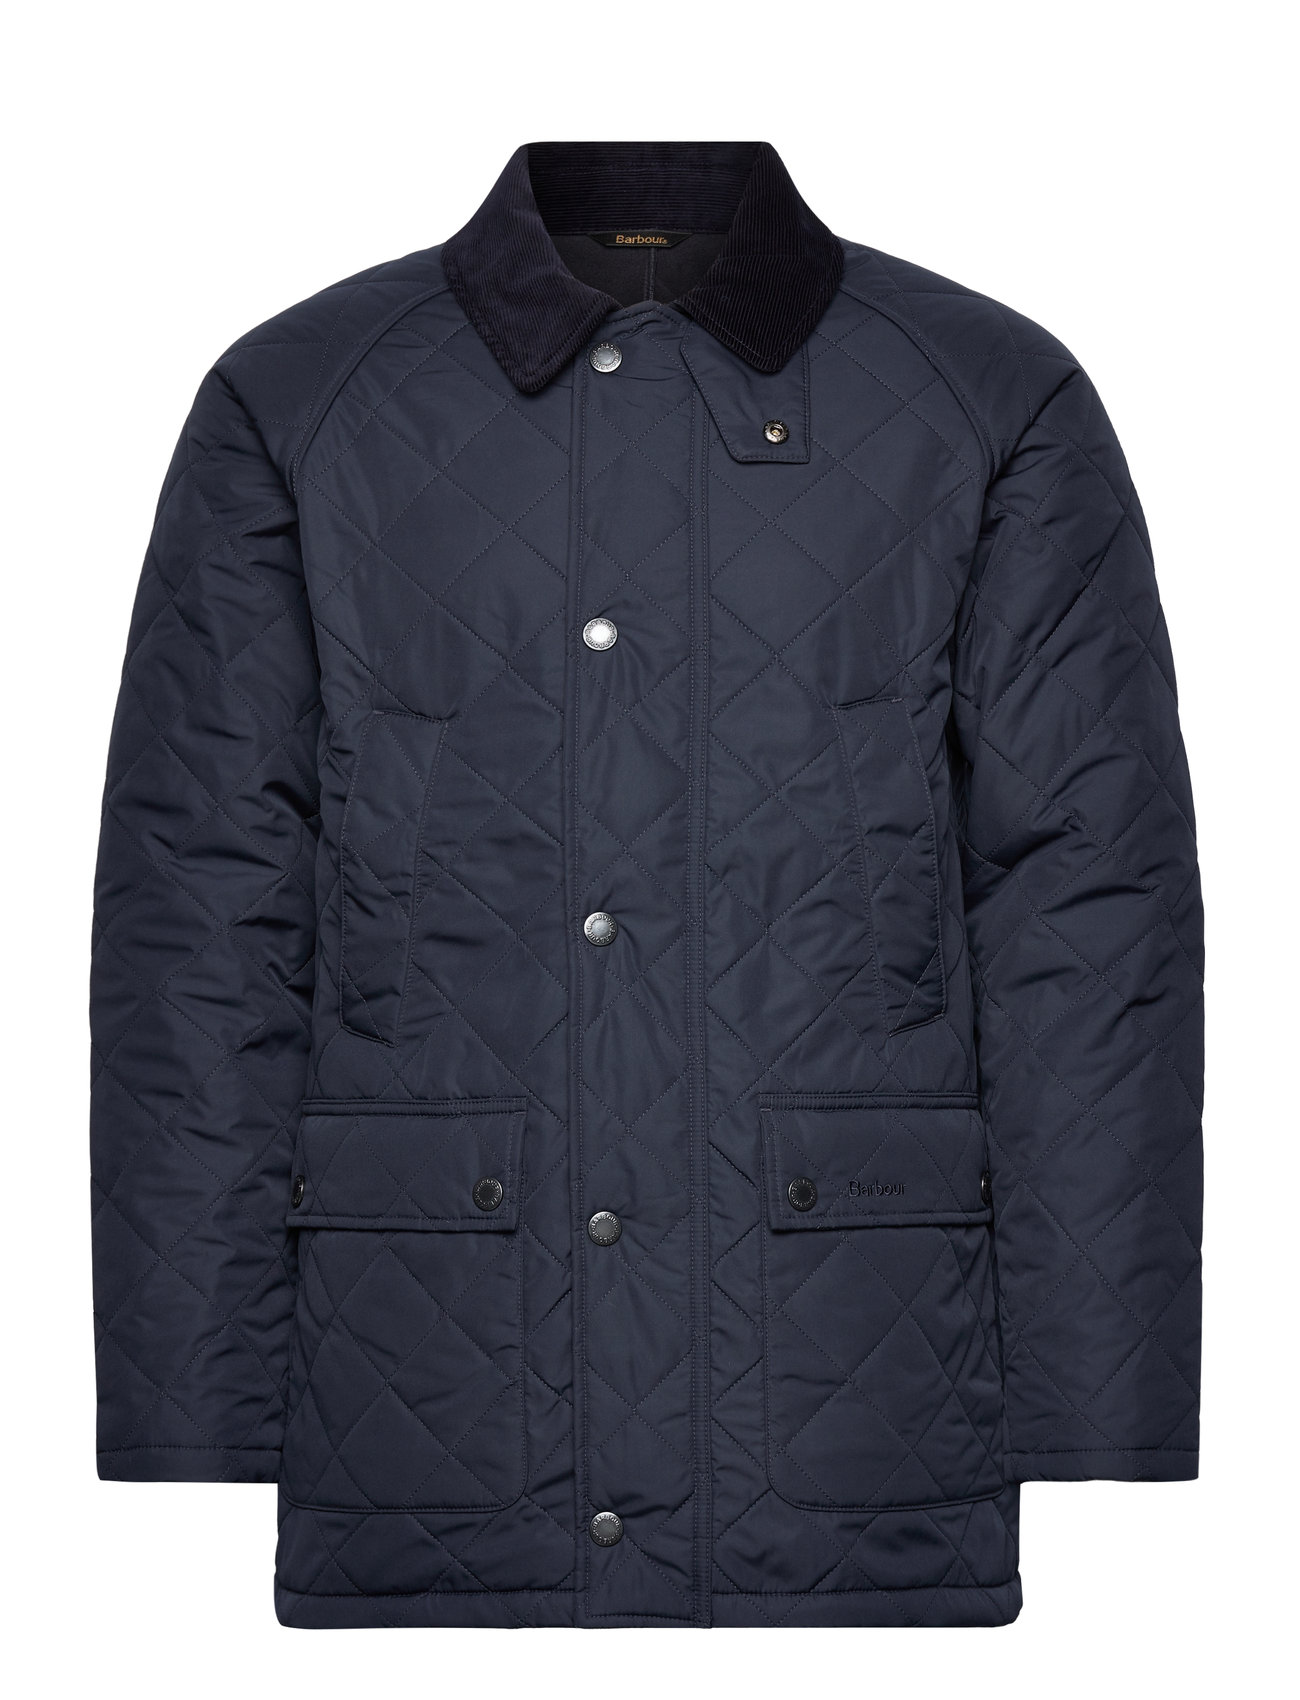 Barbour Ashby Polarqui Designers Jackets Quilted Jackets Navy Barbour